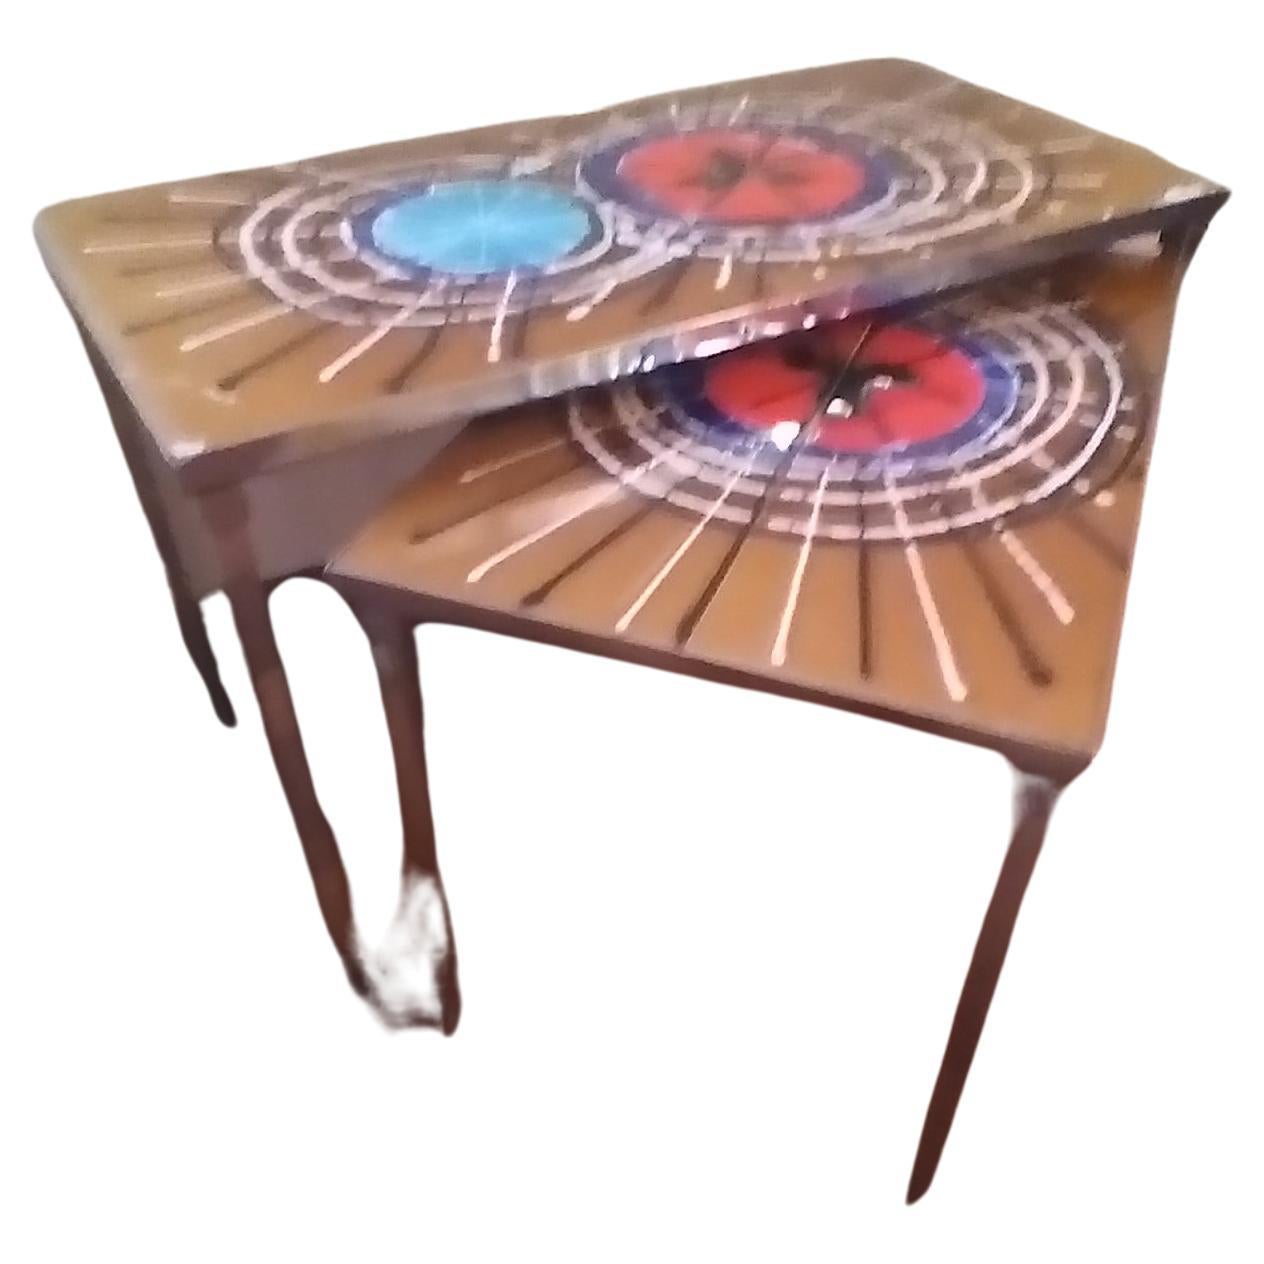 Set of two coffe-table  by Juliette Belarti mid century modern  1960s , top in painted ceramic and steel structur.
Measures 60 cm , 30 cm , 38,5 cm hight
and 34 cm , 30 cm , 34,5 cm hight.